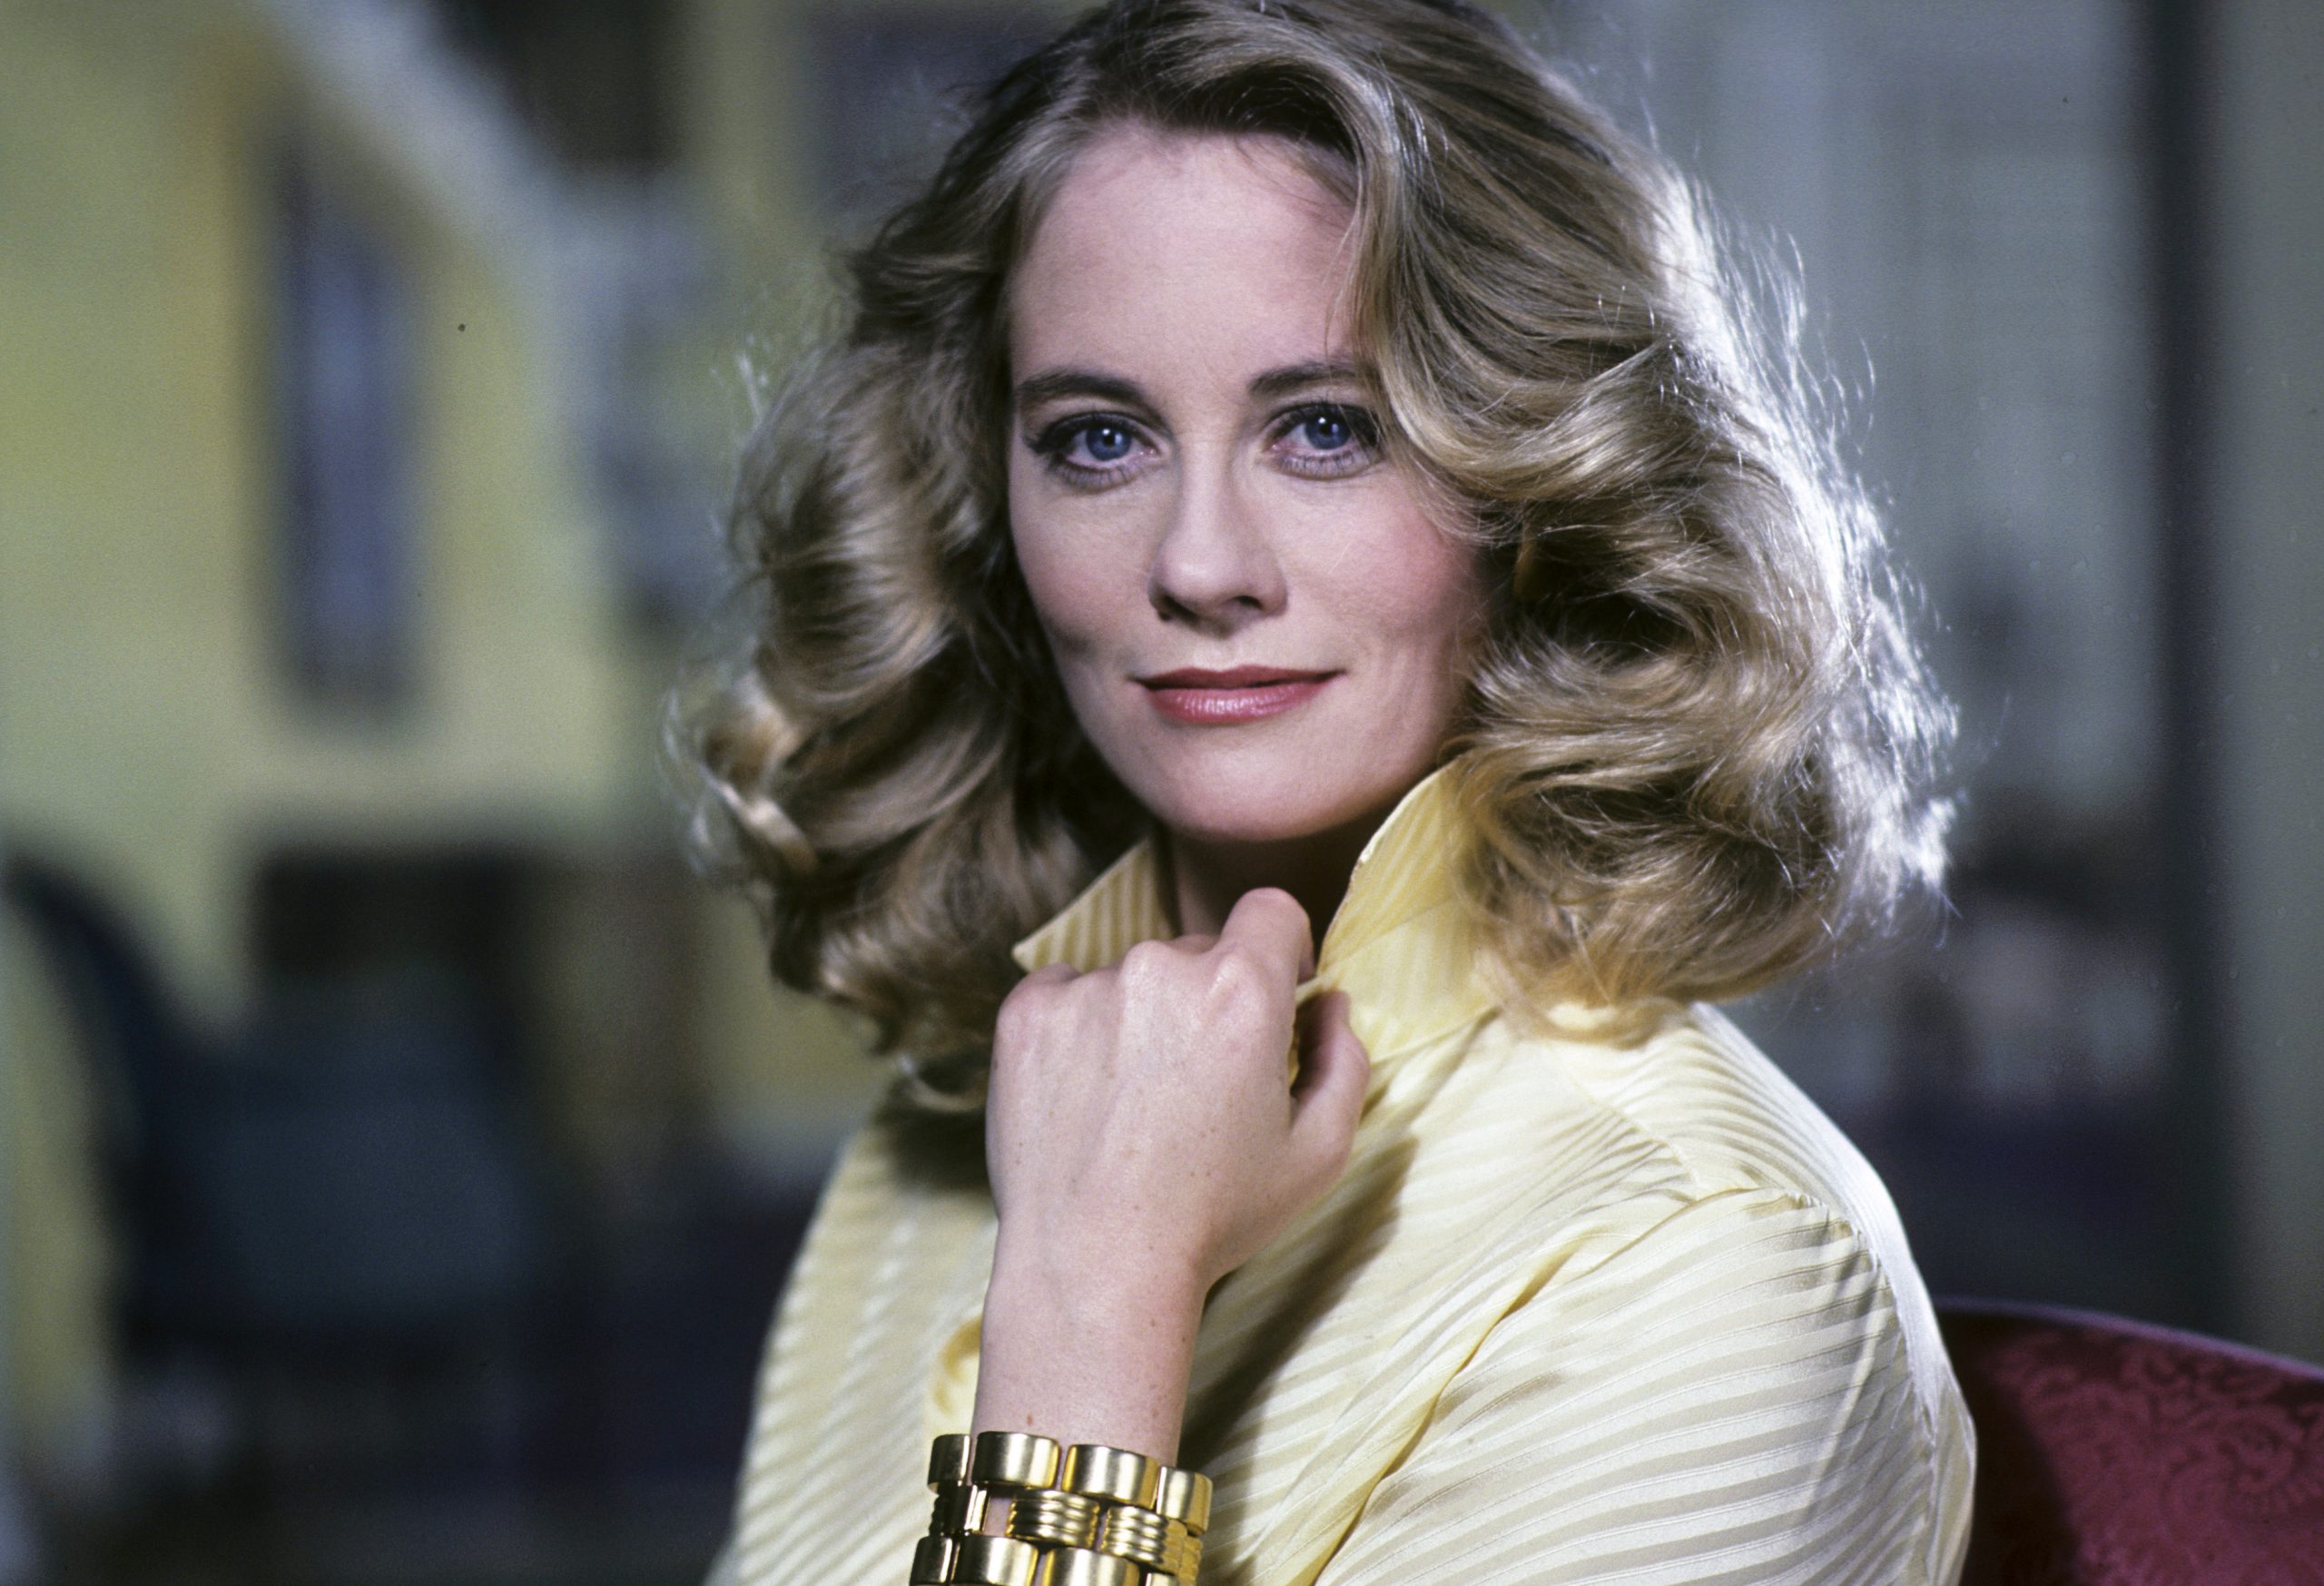 Cybill Shepherd shares three kids with two partners.